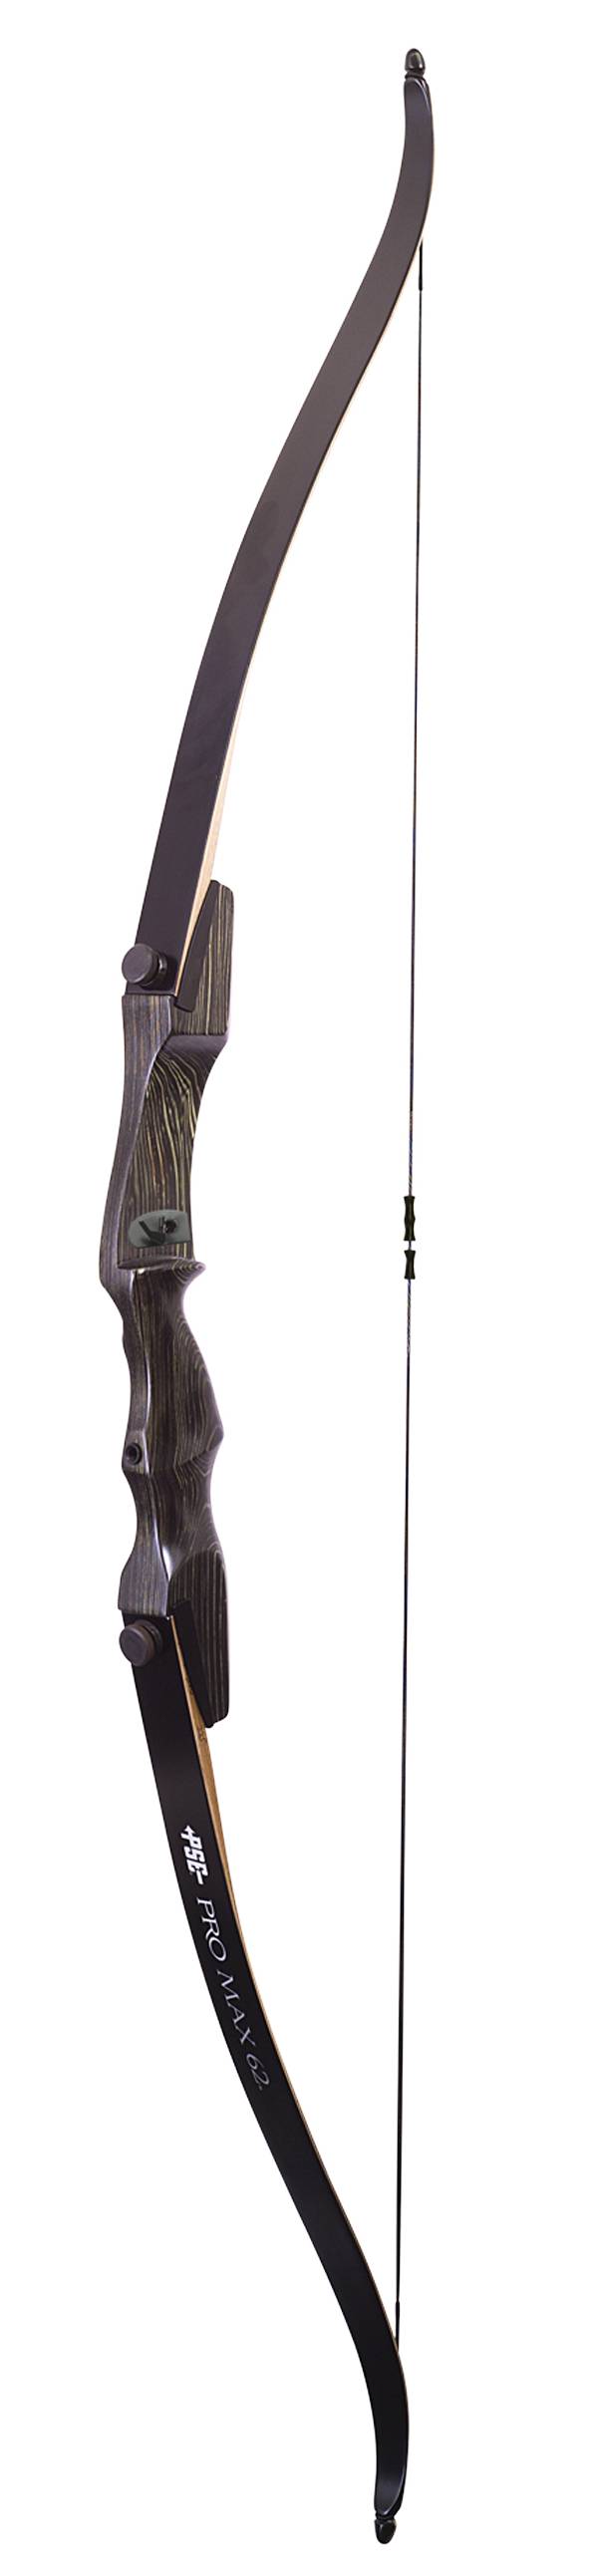 PSE Pro Max Recurve Bow Package product image